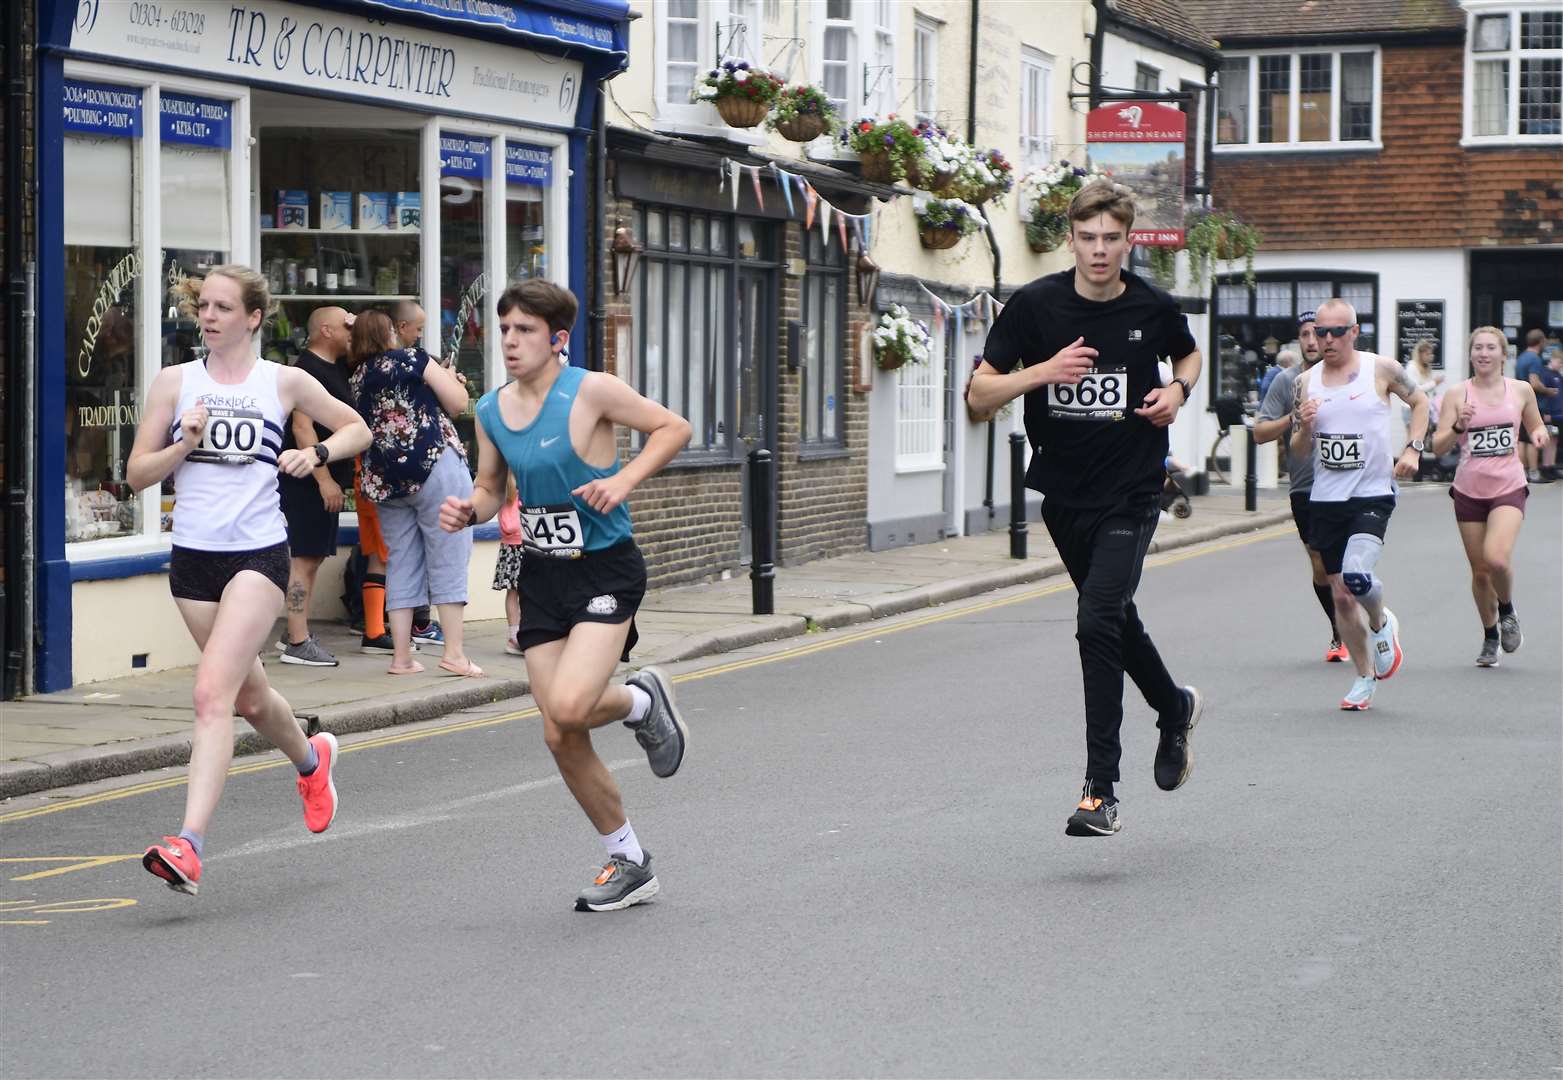 Runners make their way through the town Picture: Barry Goodwin